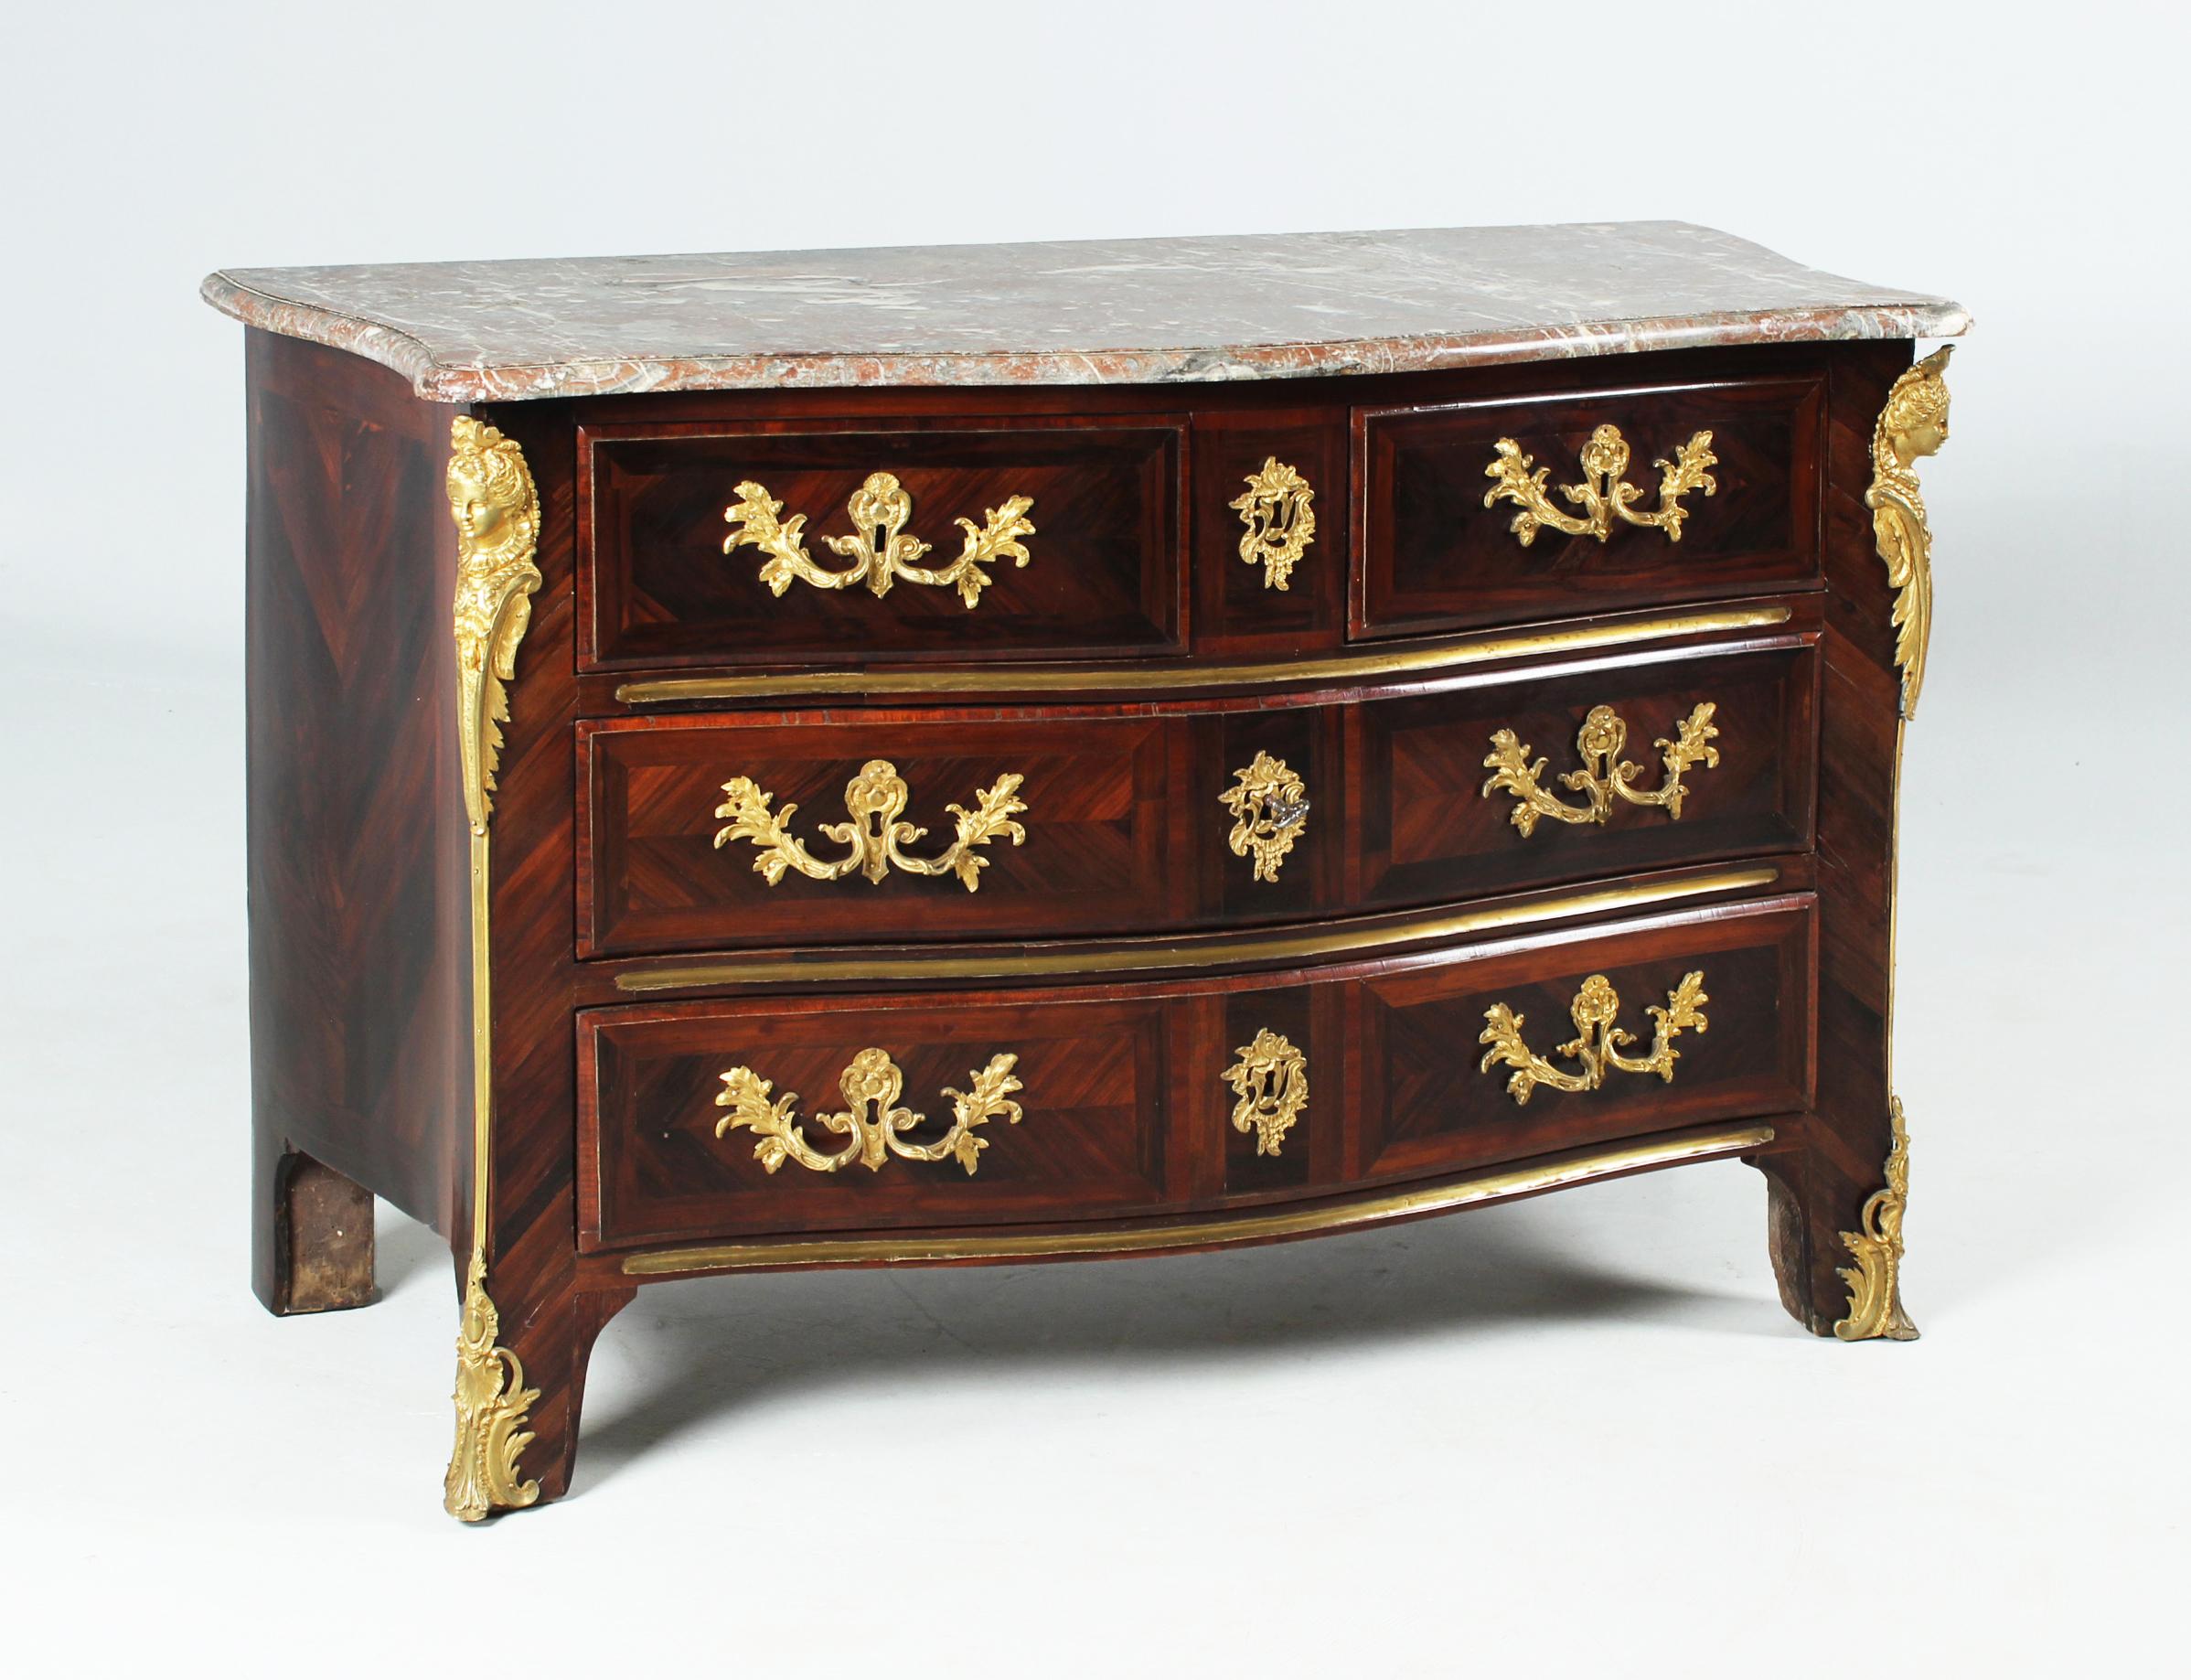 French Regence Chest of Drawers with Ormolu Fittings, Early 18th Century For Sale 11